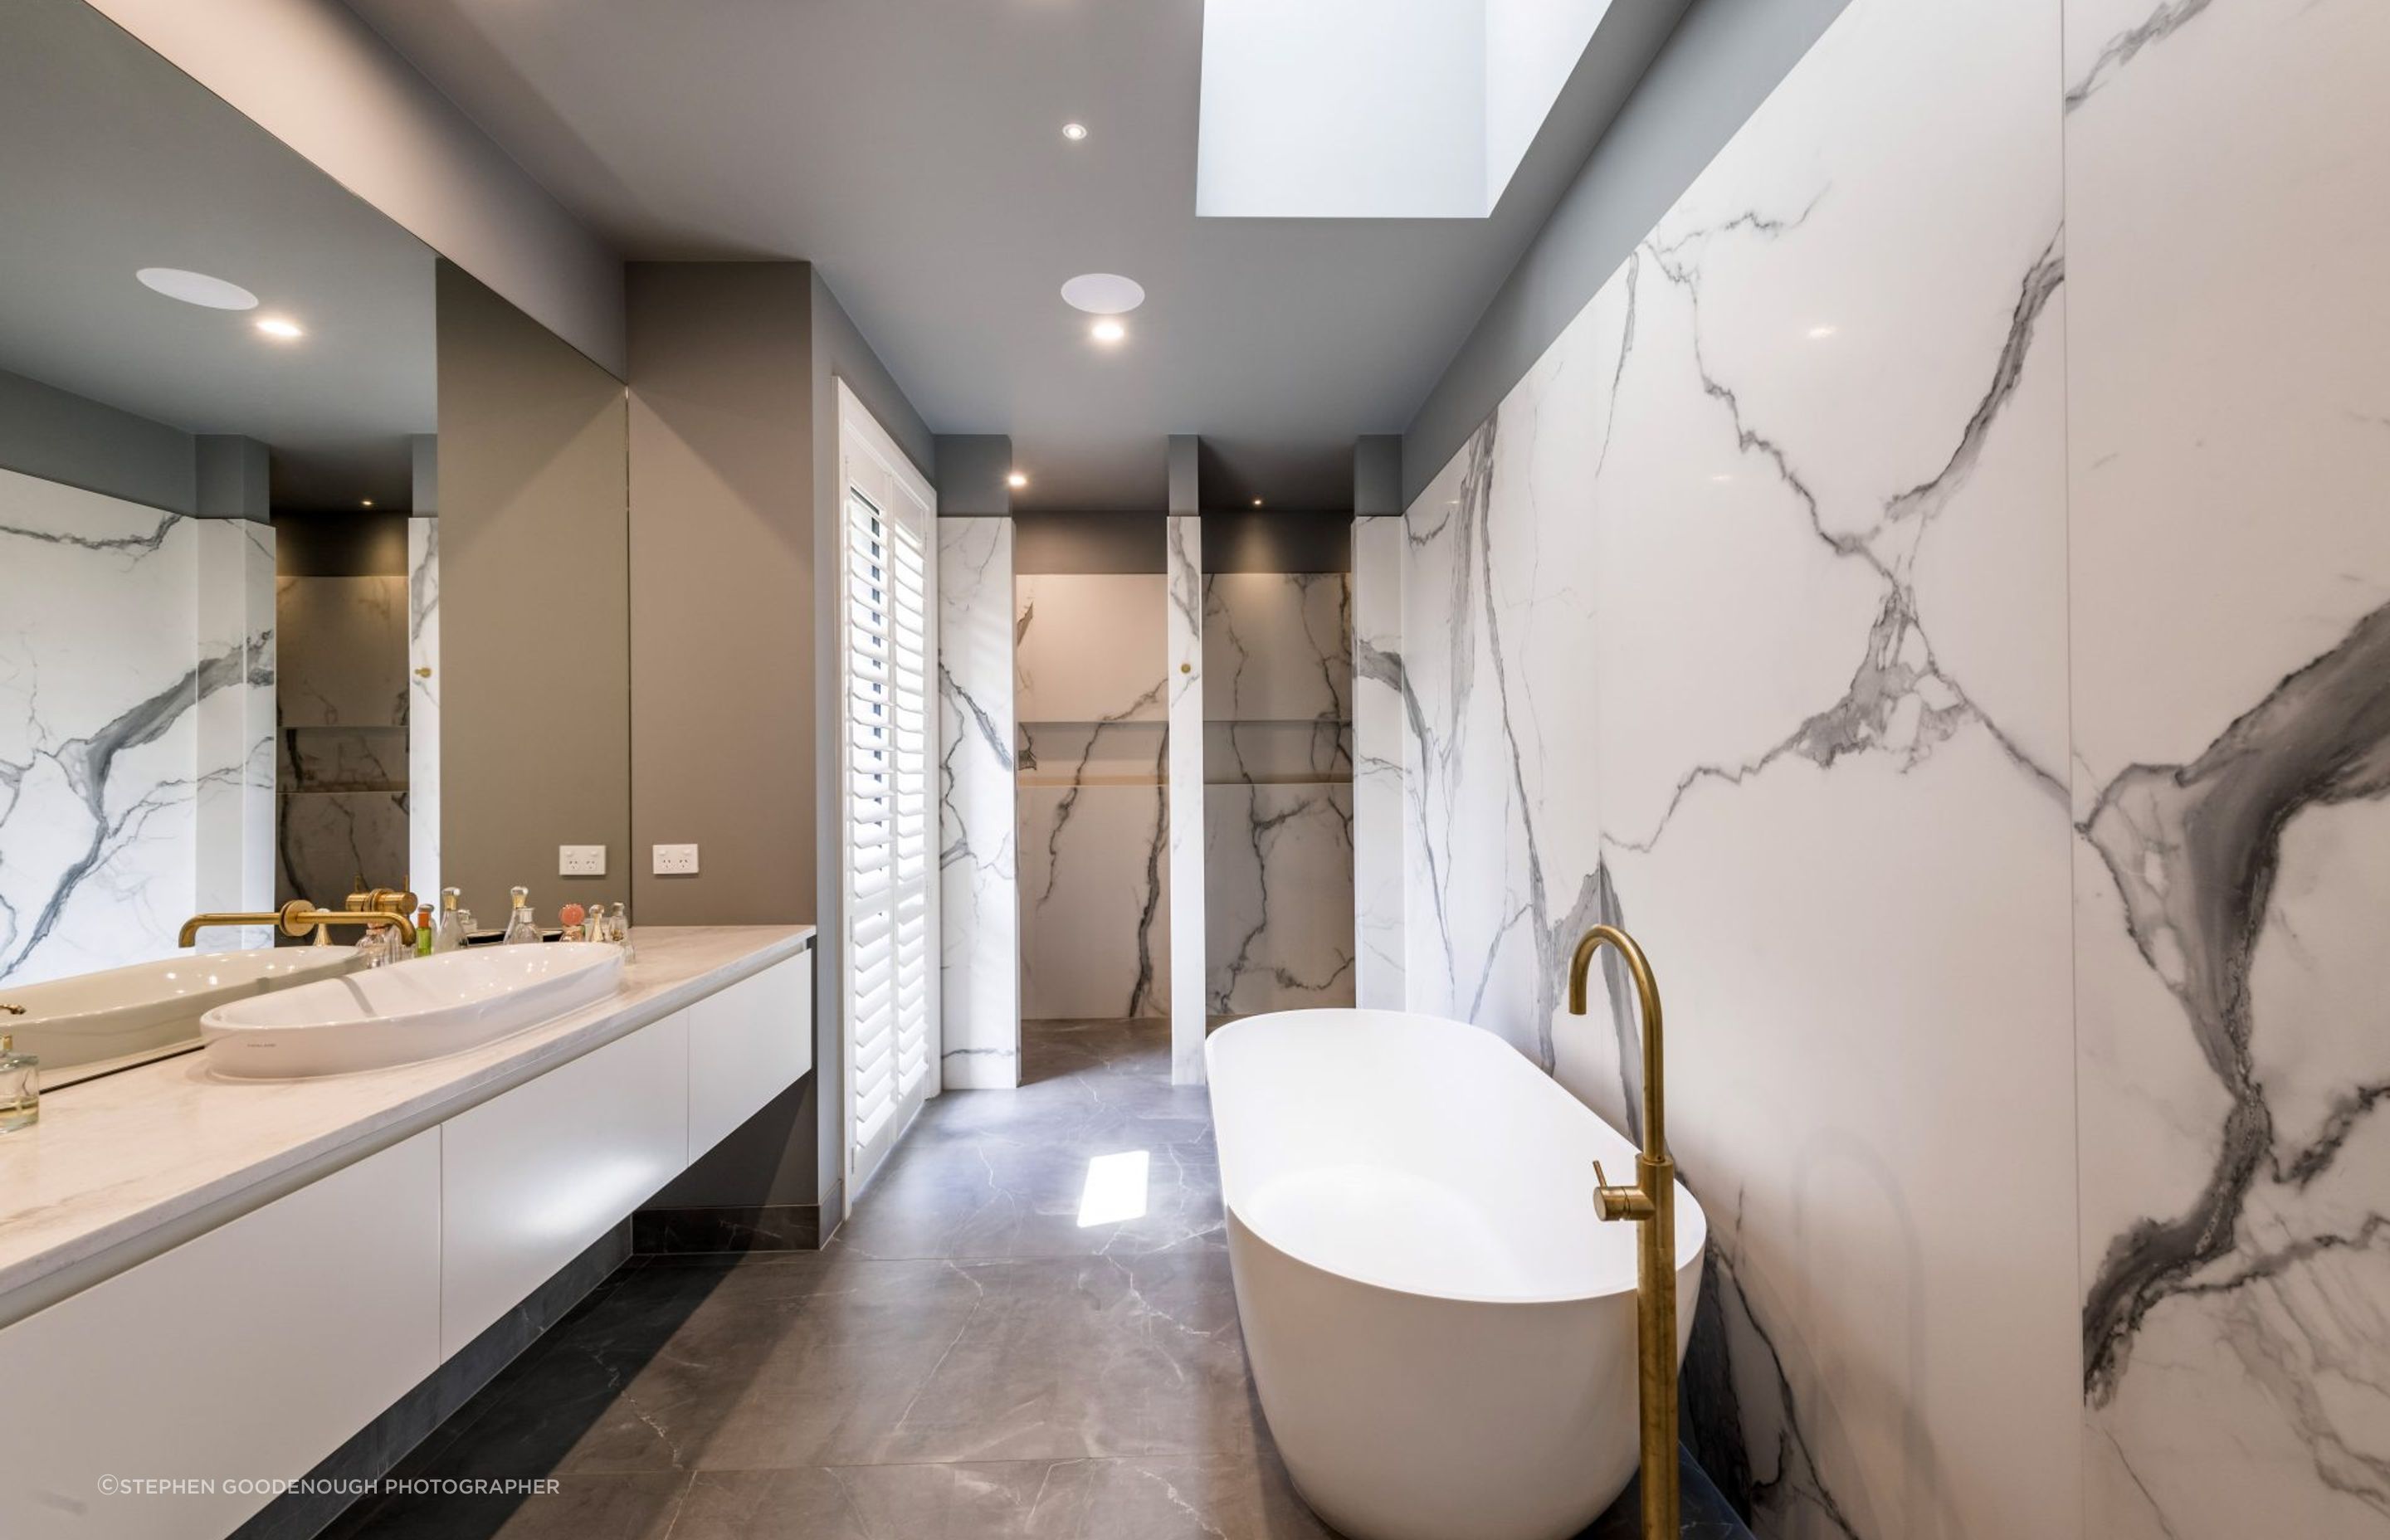 Large-format marble-veined tiling is a feature of this sumptuous bathroom.